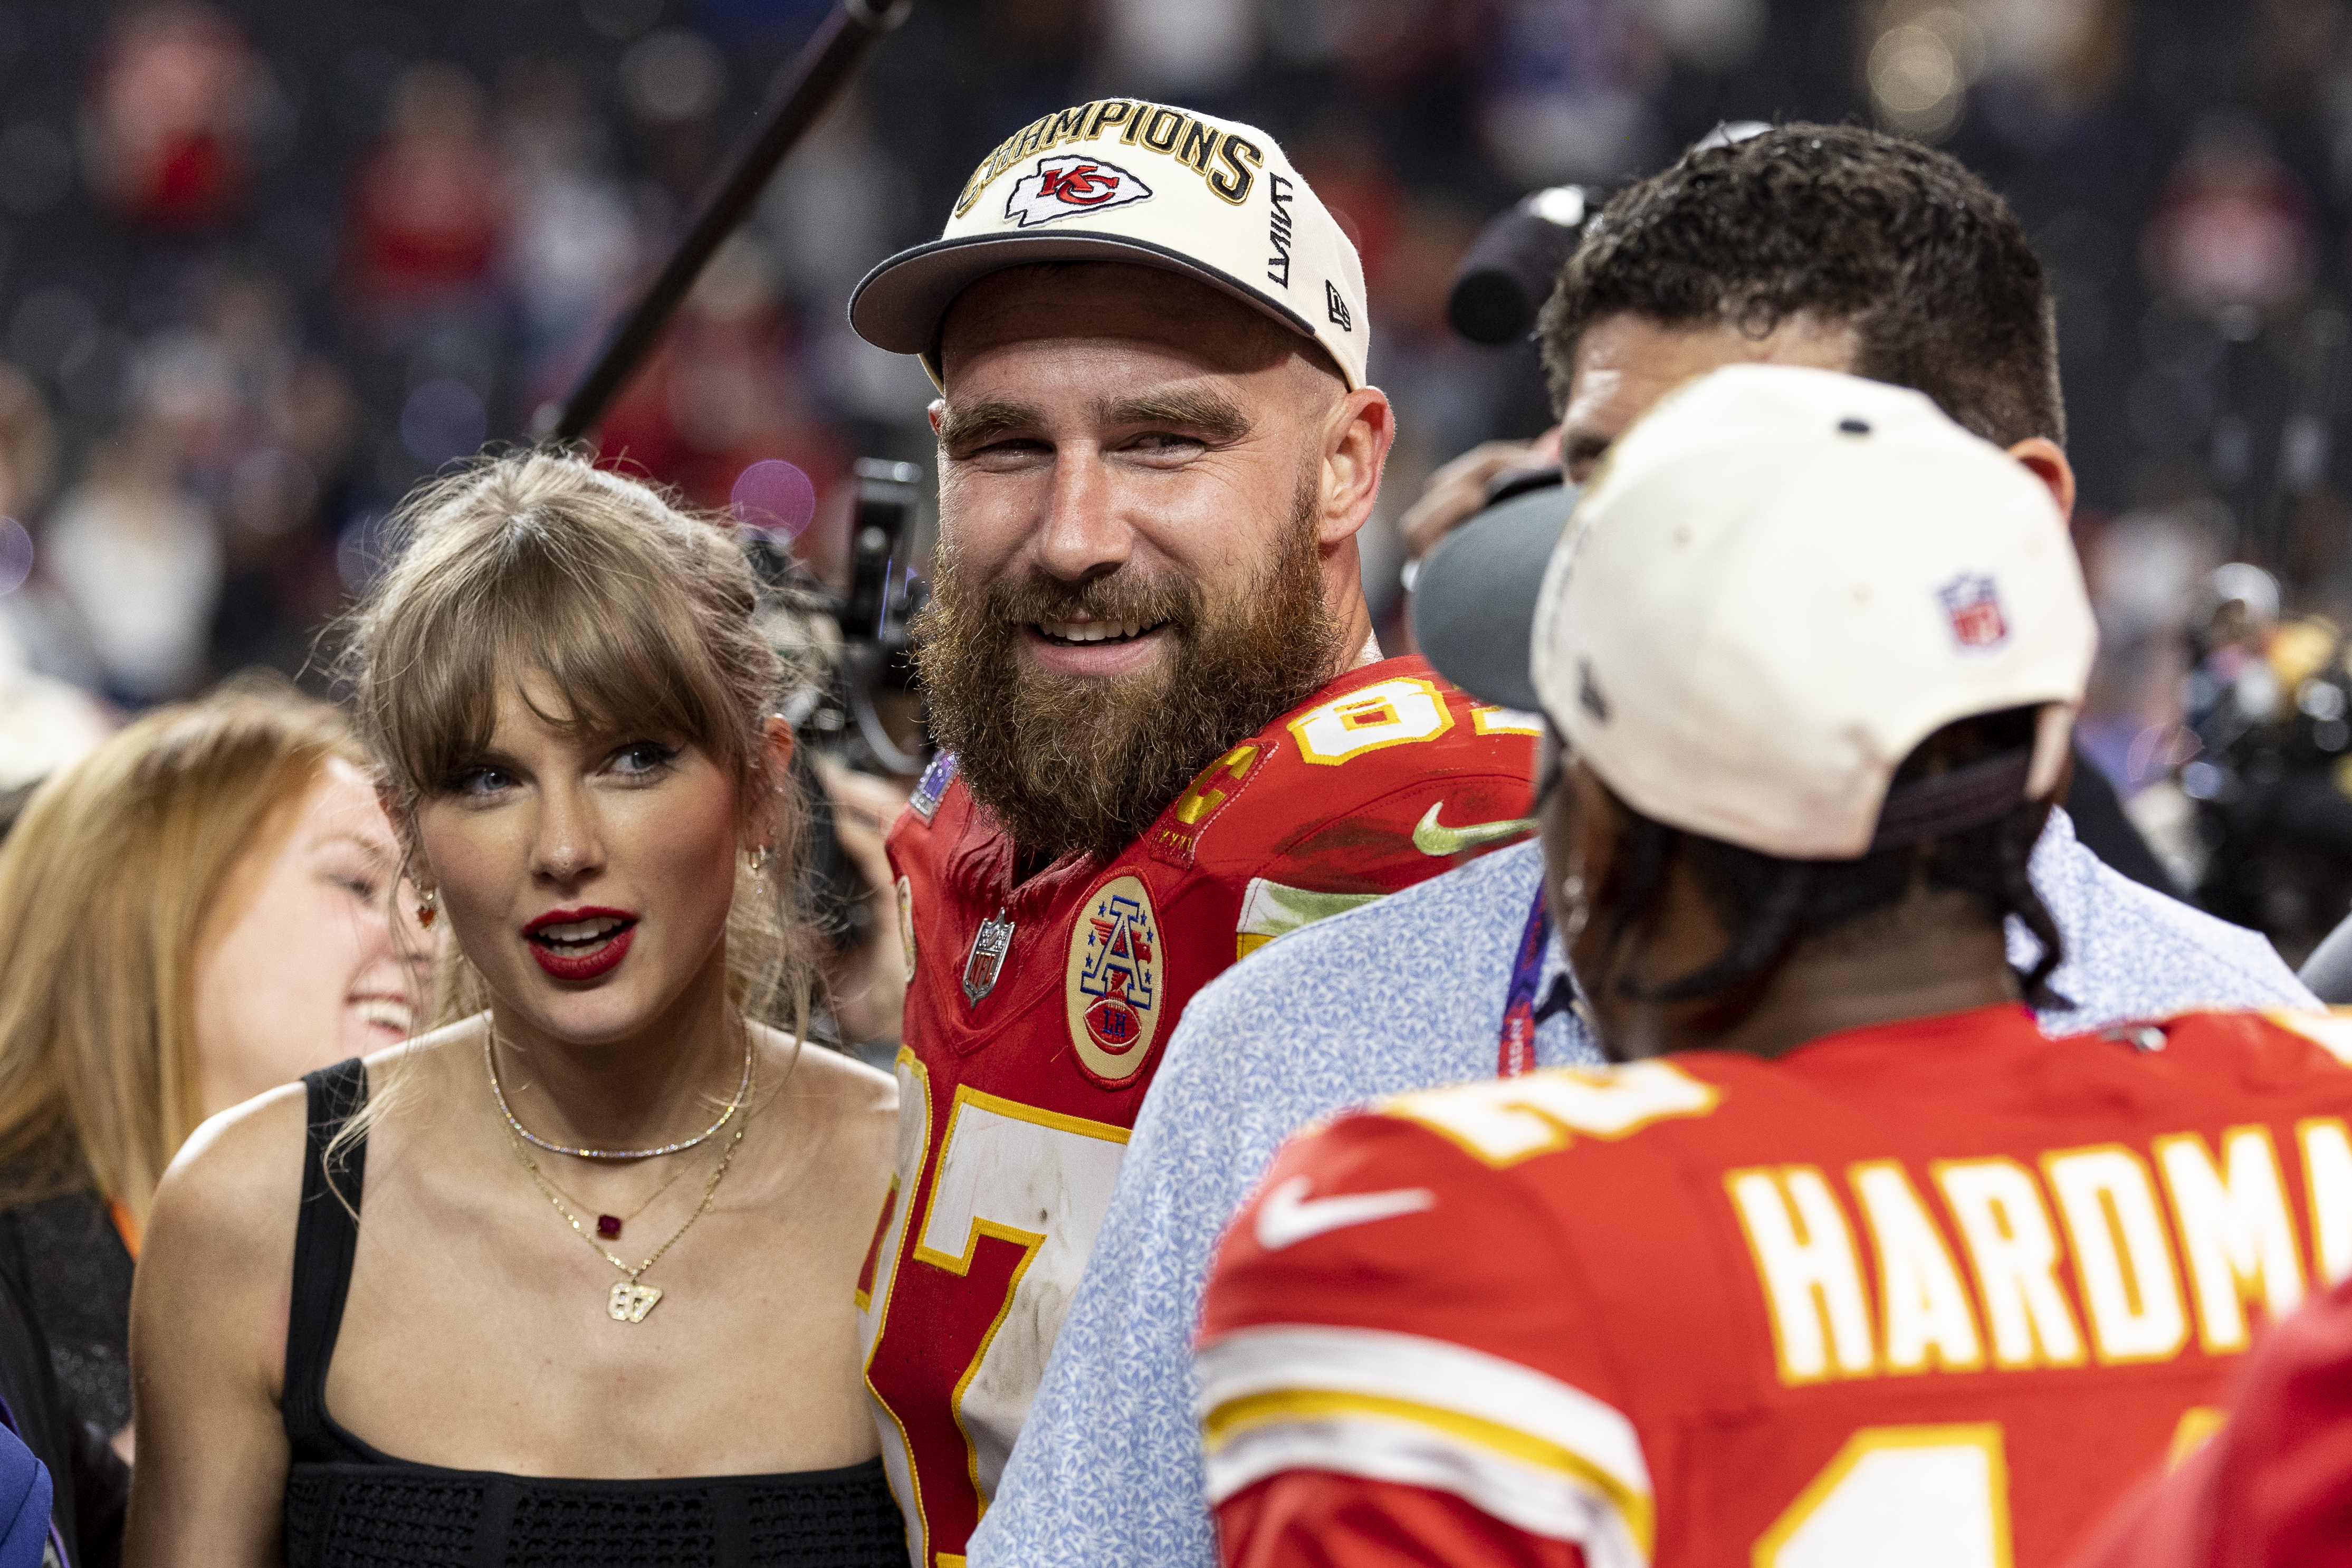 Taylor attended the Super Bowl to cheer on her boyfriend, Travis Kelce on the Kansas City Chiefs